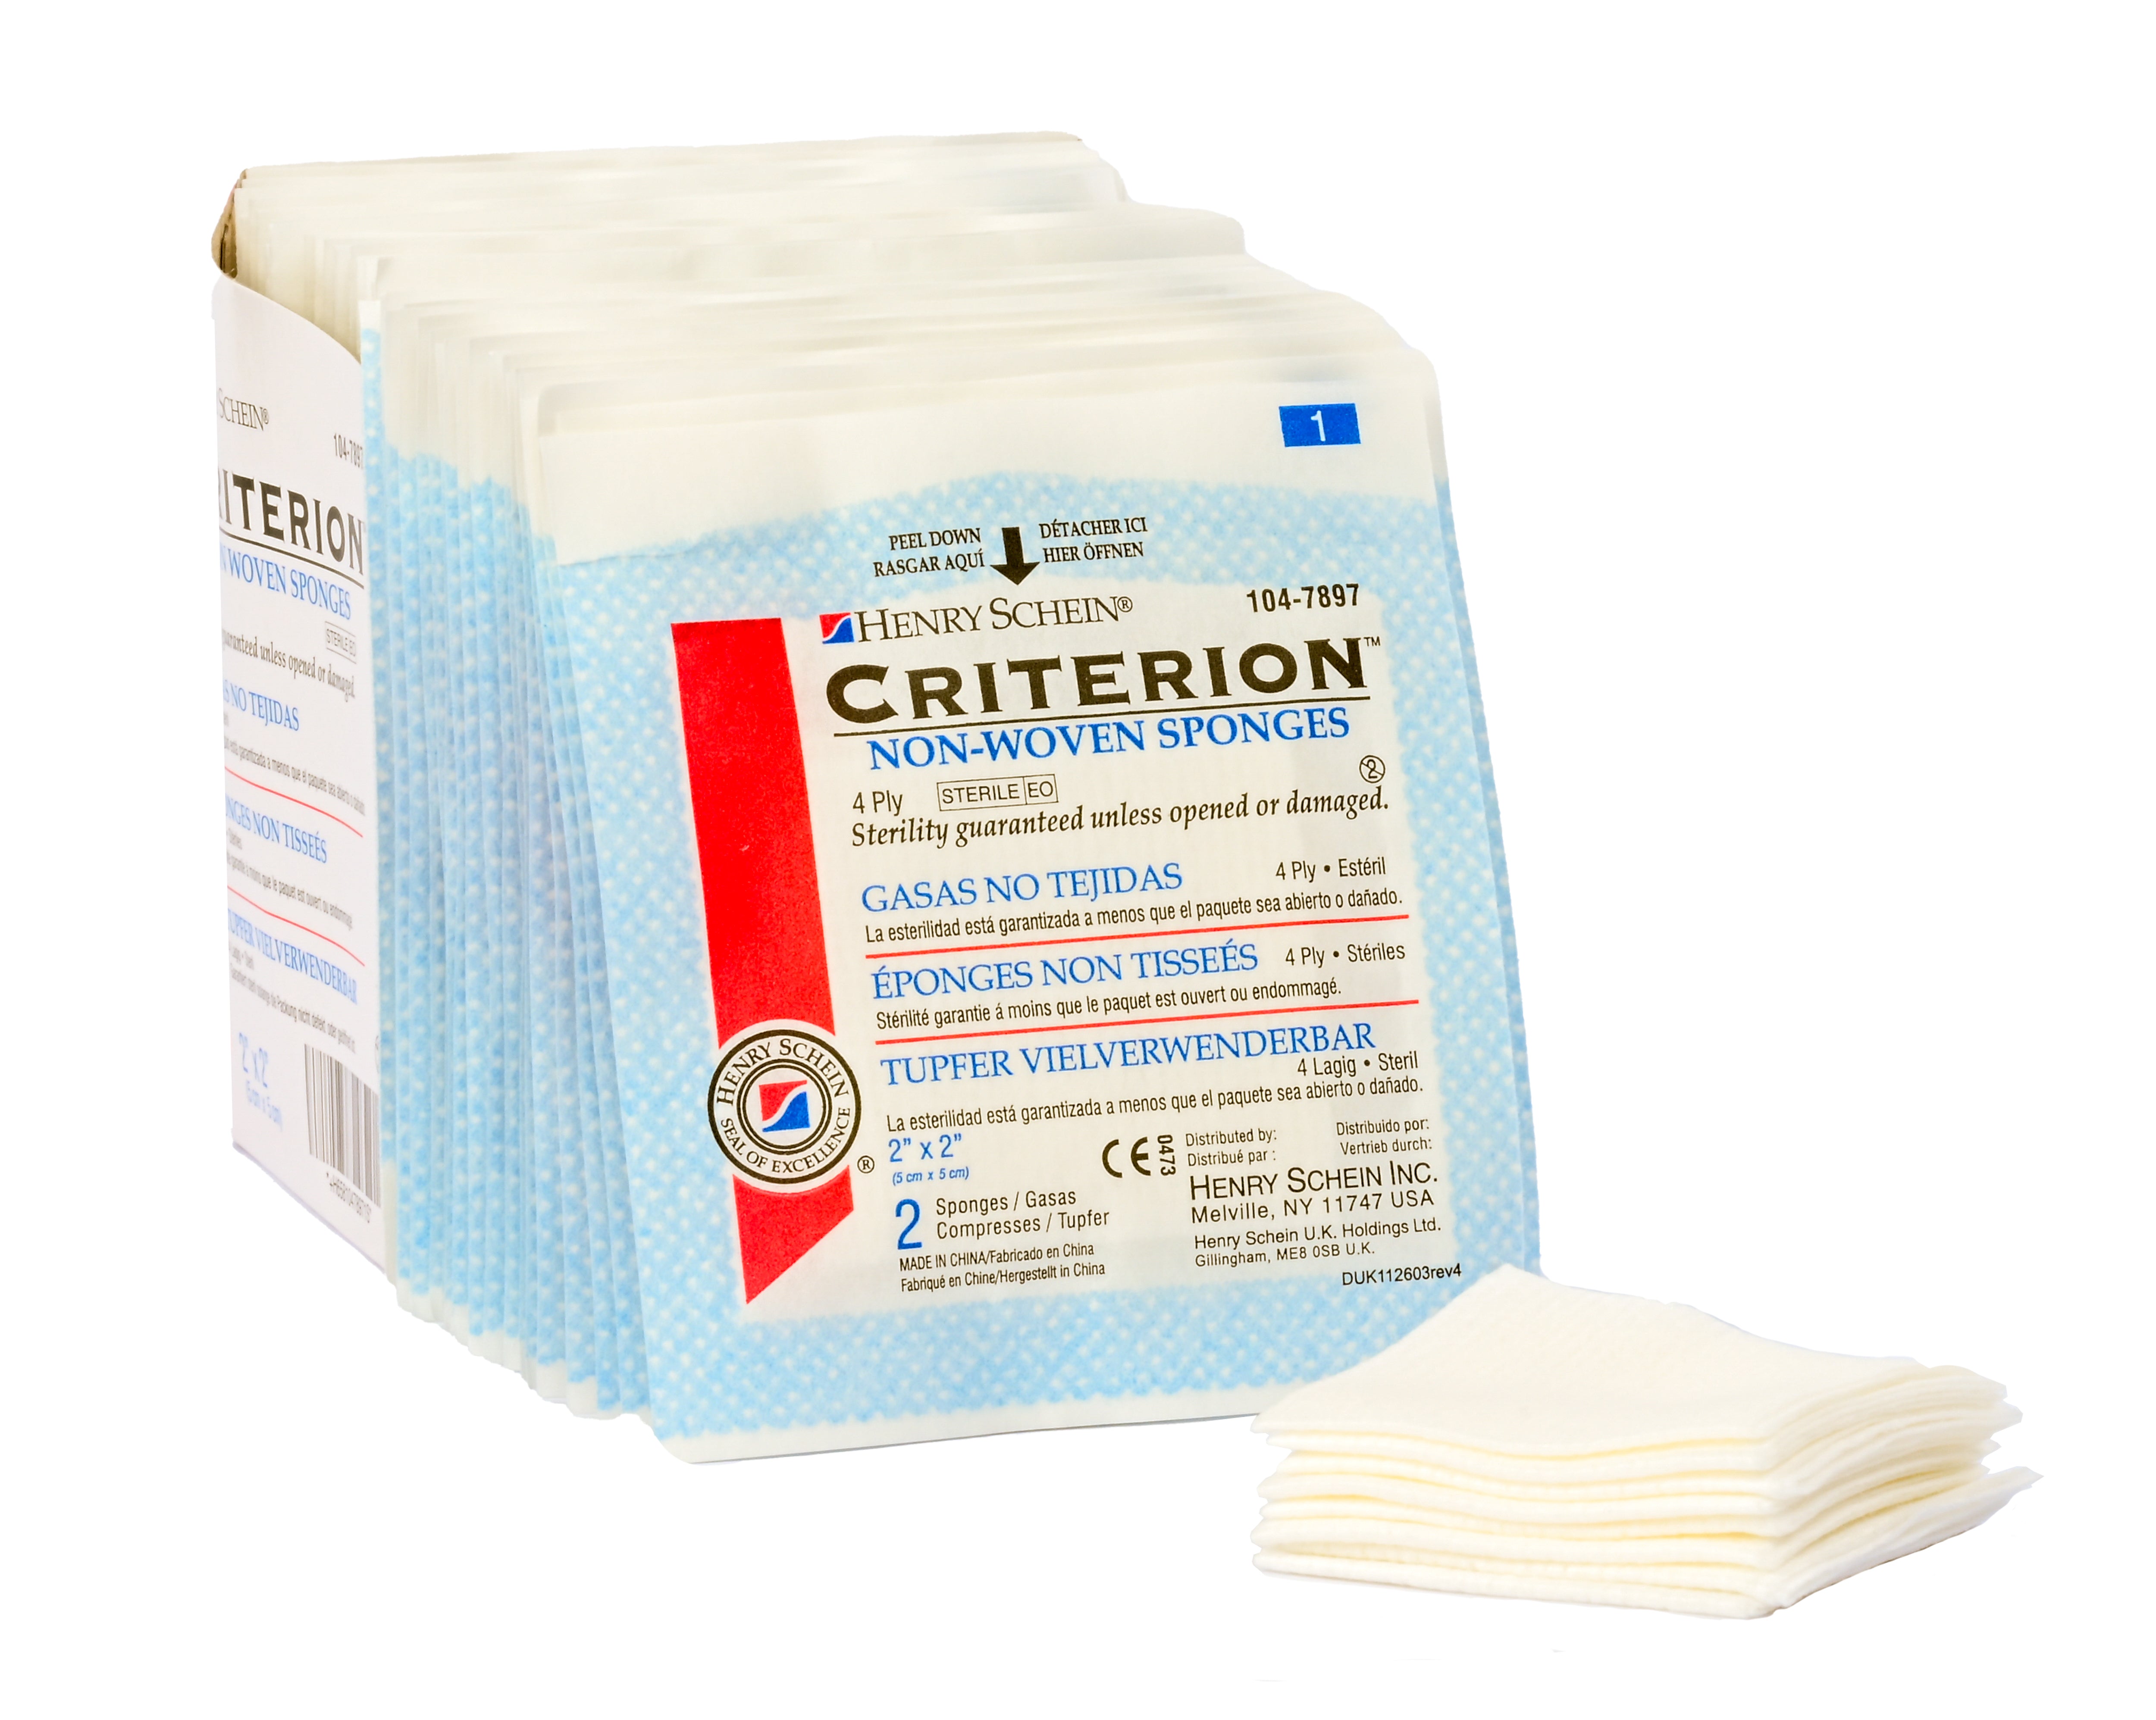 Henry Schein Rayon/Polyester Blend Non-Woven Sponges, 4 Ply Sterile, 4-Ply